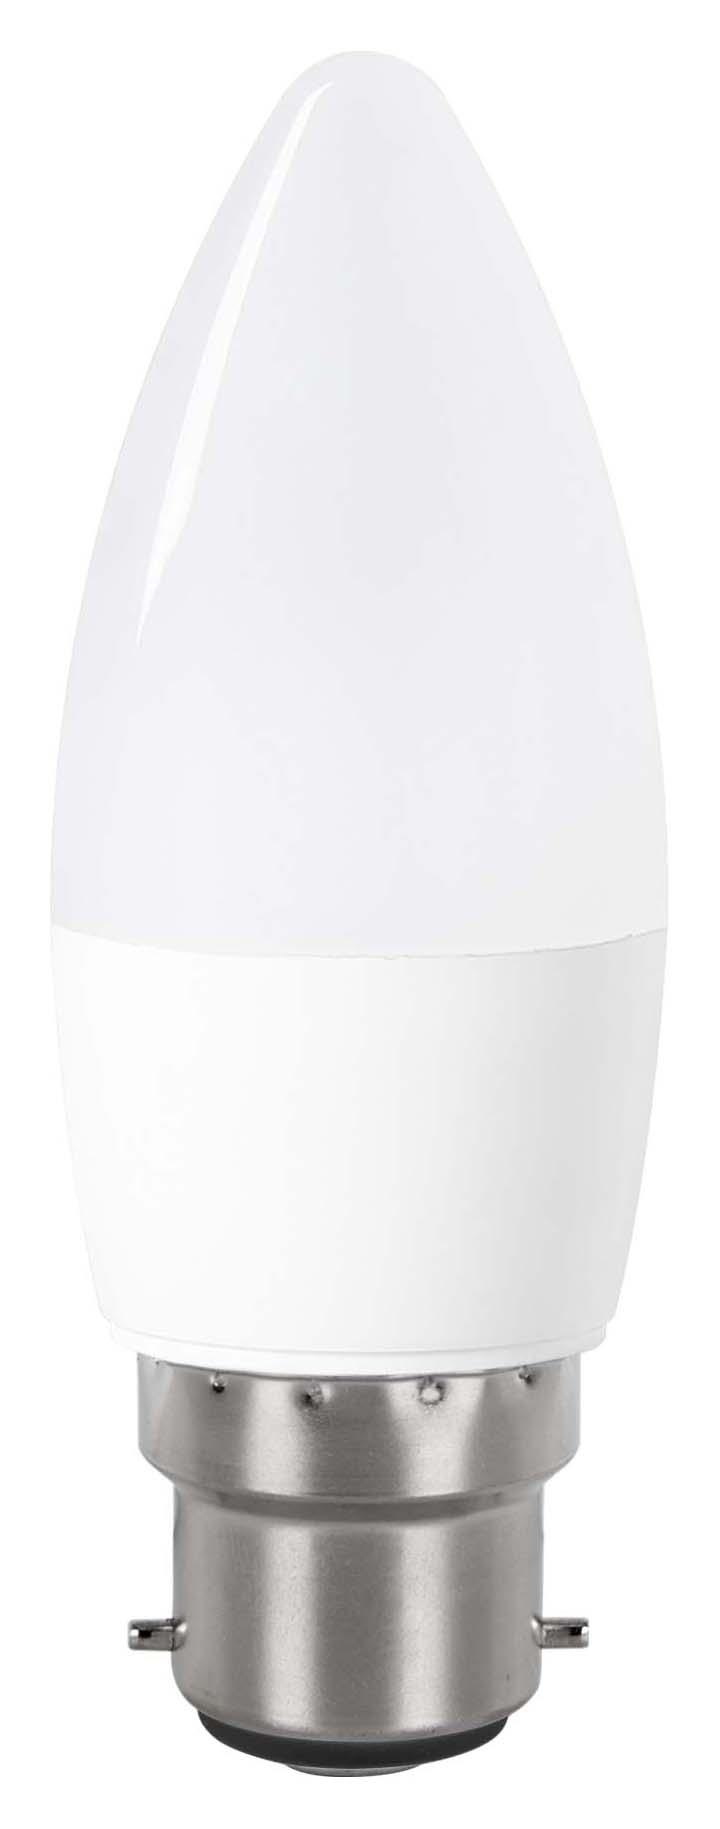 Wickes Dimmable LED B22 Candle 4.9W Warm White Light Bulb